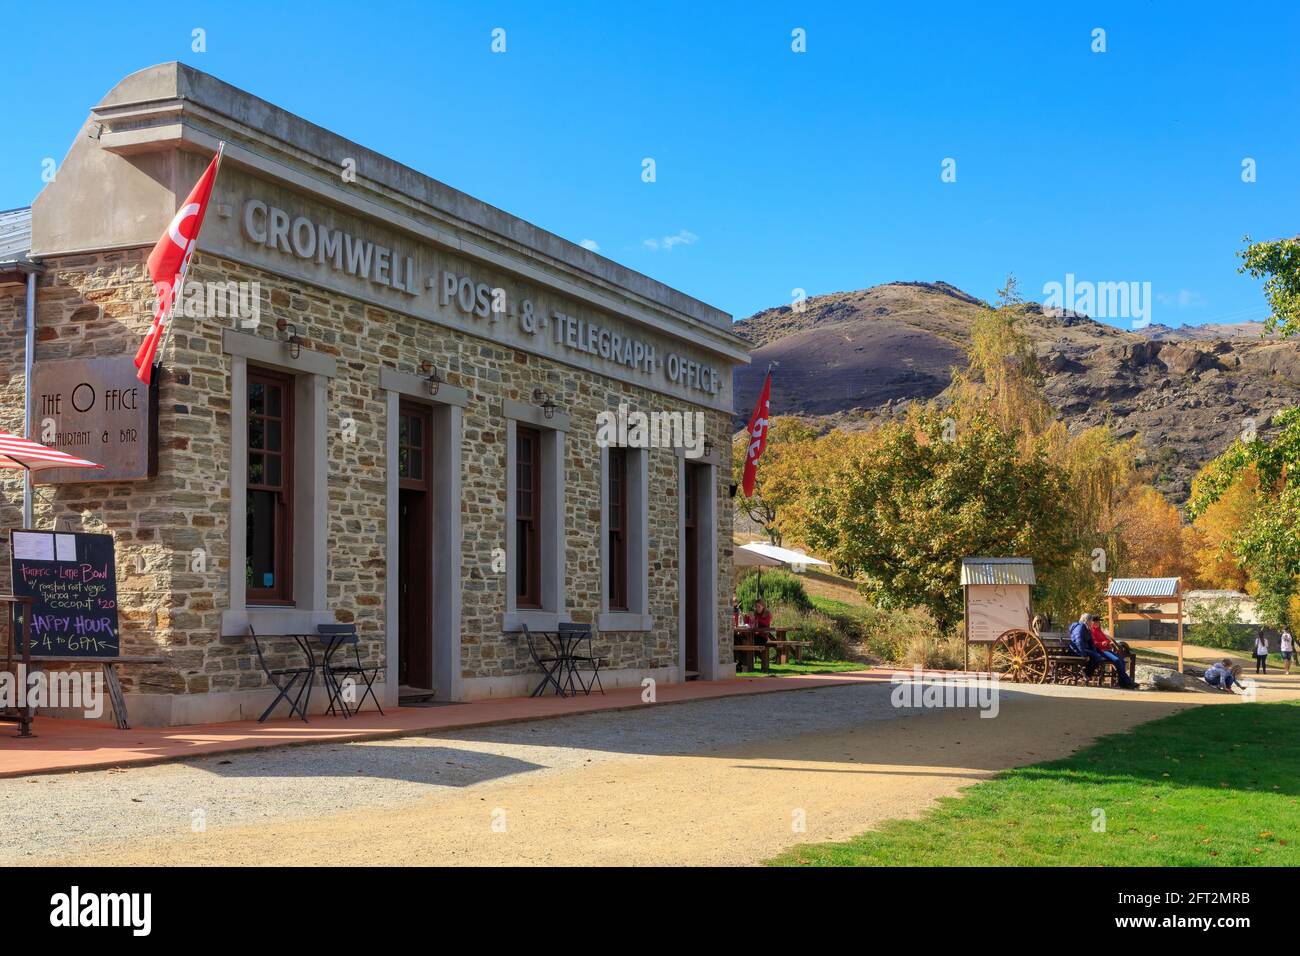 Old Post & Telegraph Office, a reconstruction of an 1860s building, in the Cromwell Heritage Precinct, Cromwell, New Zealand Stock Photo